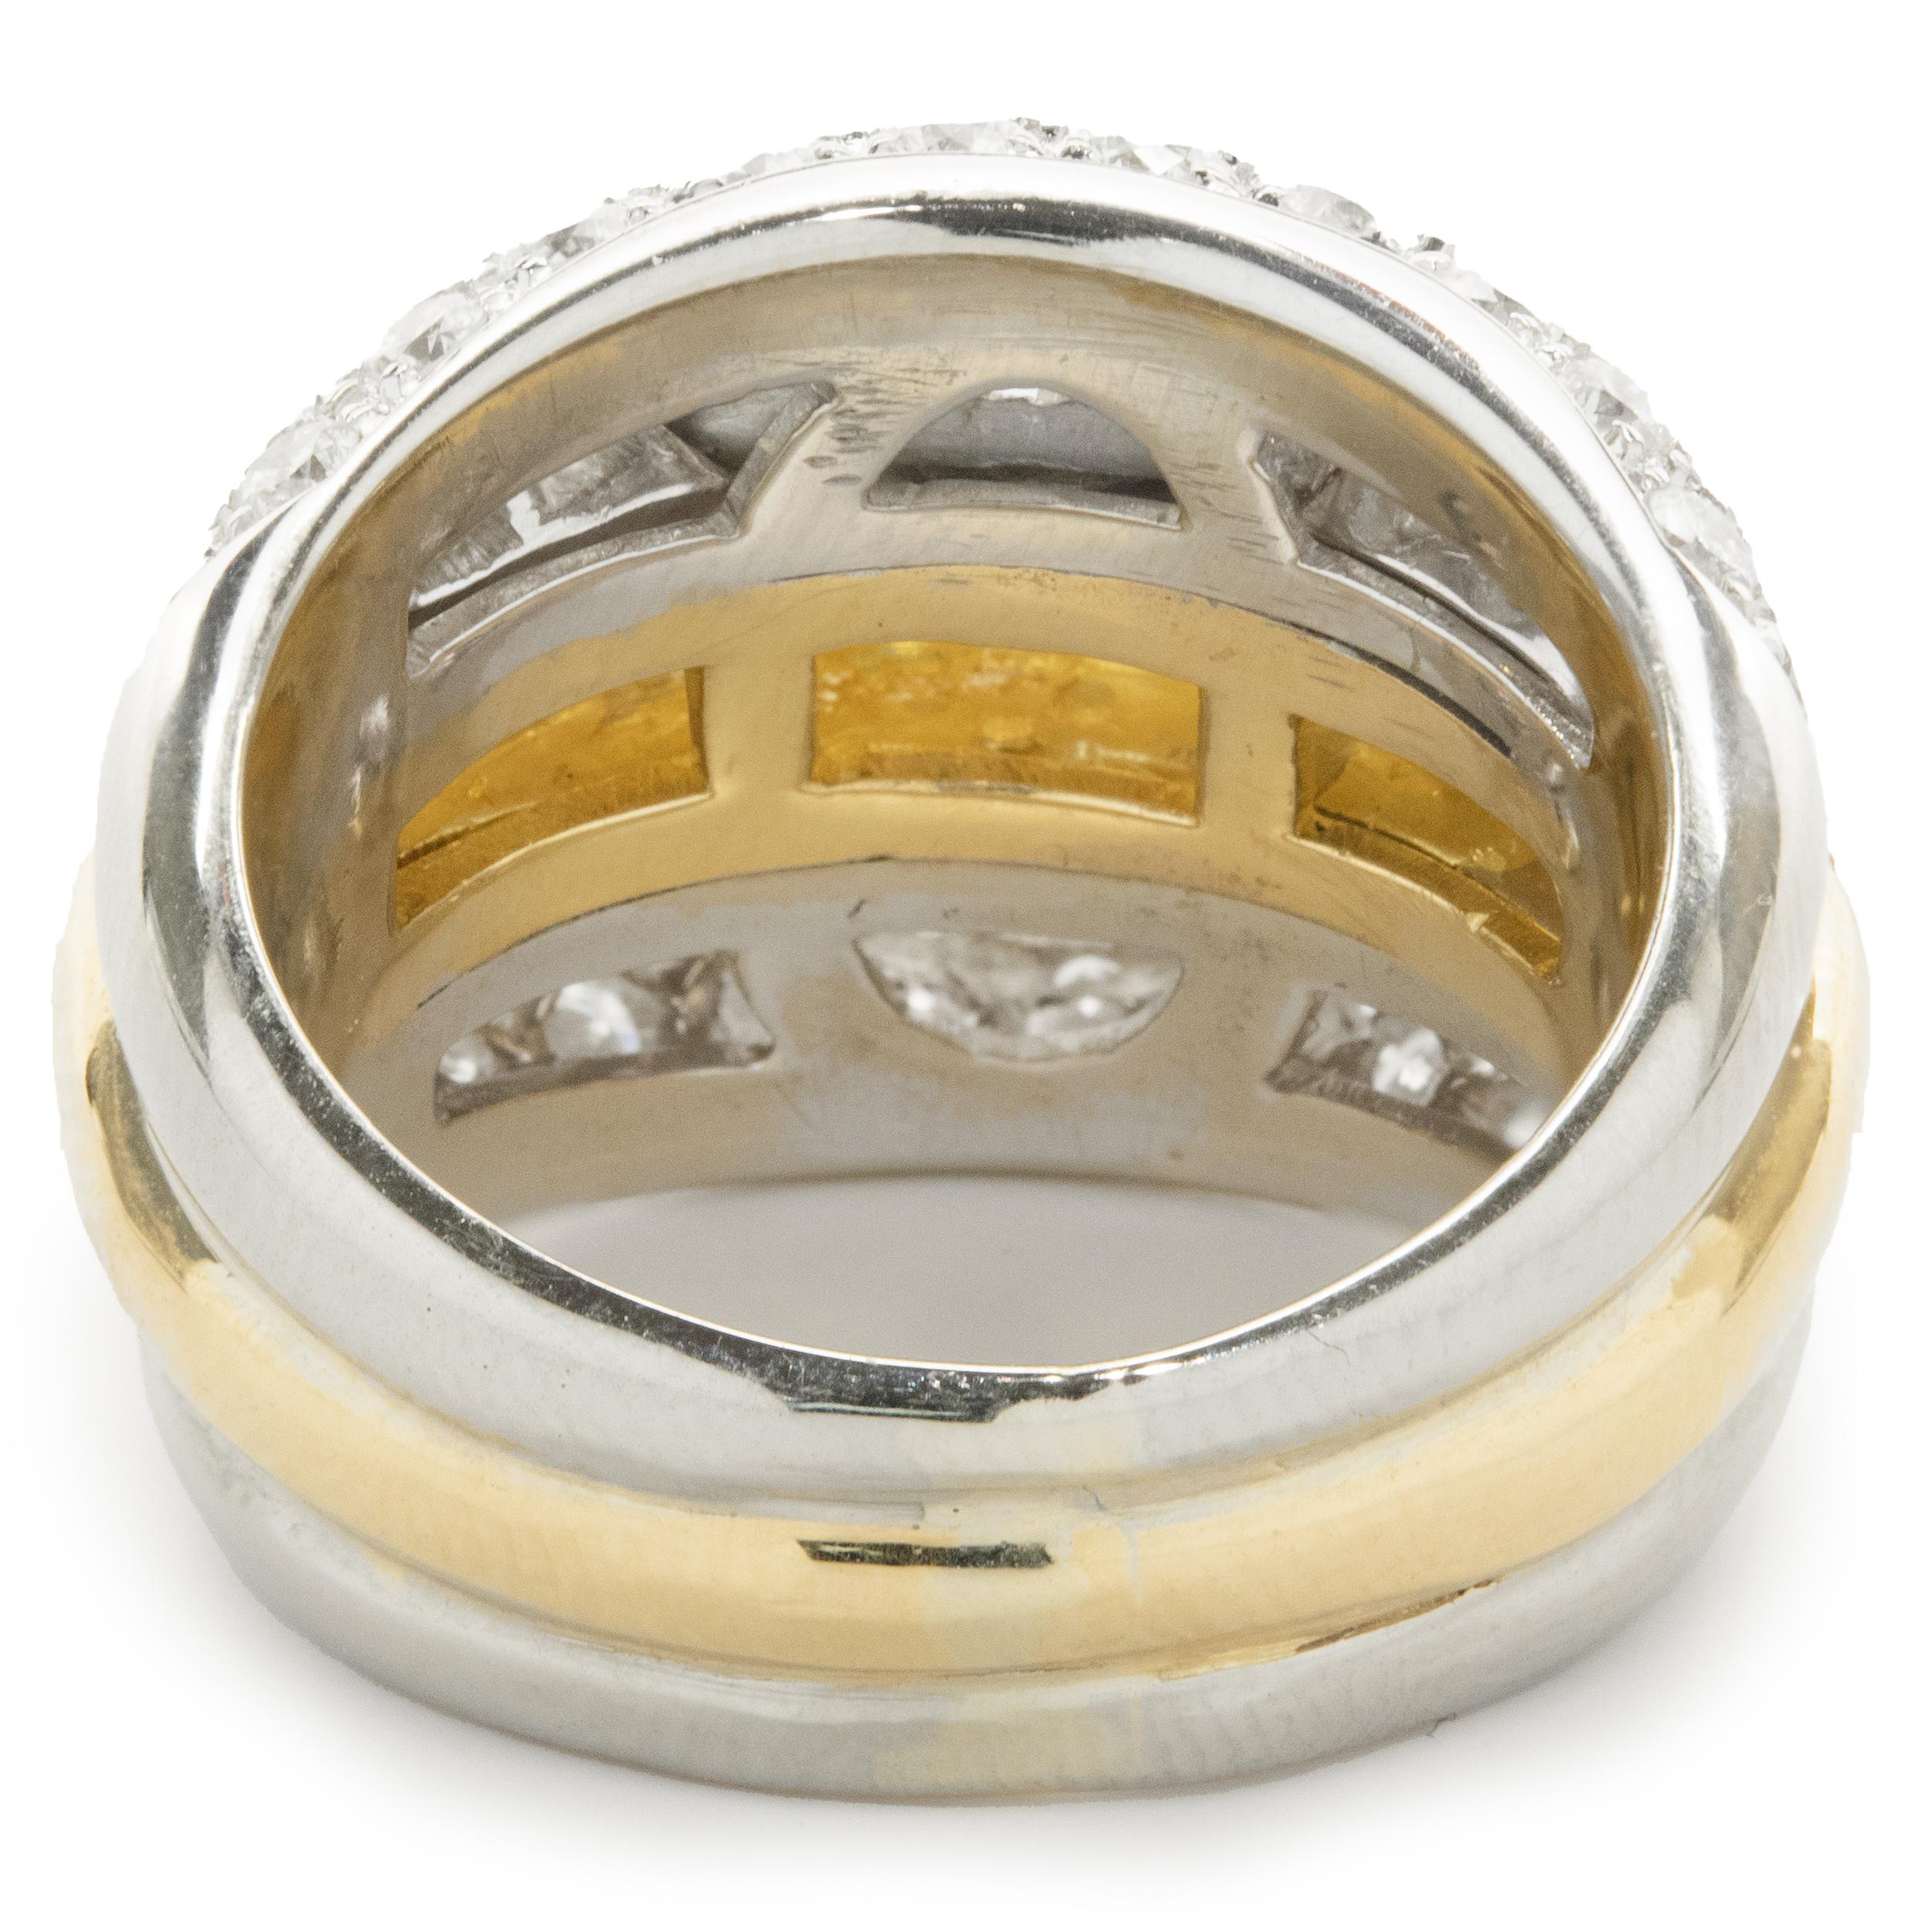 RCM 18 Karat White and Yellow Gold Pave Round and Baguette Five Layer Cigar Band In Excellent Condition For Sale In Scottsdale, AZ